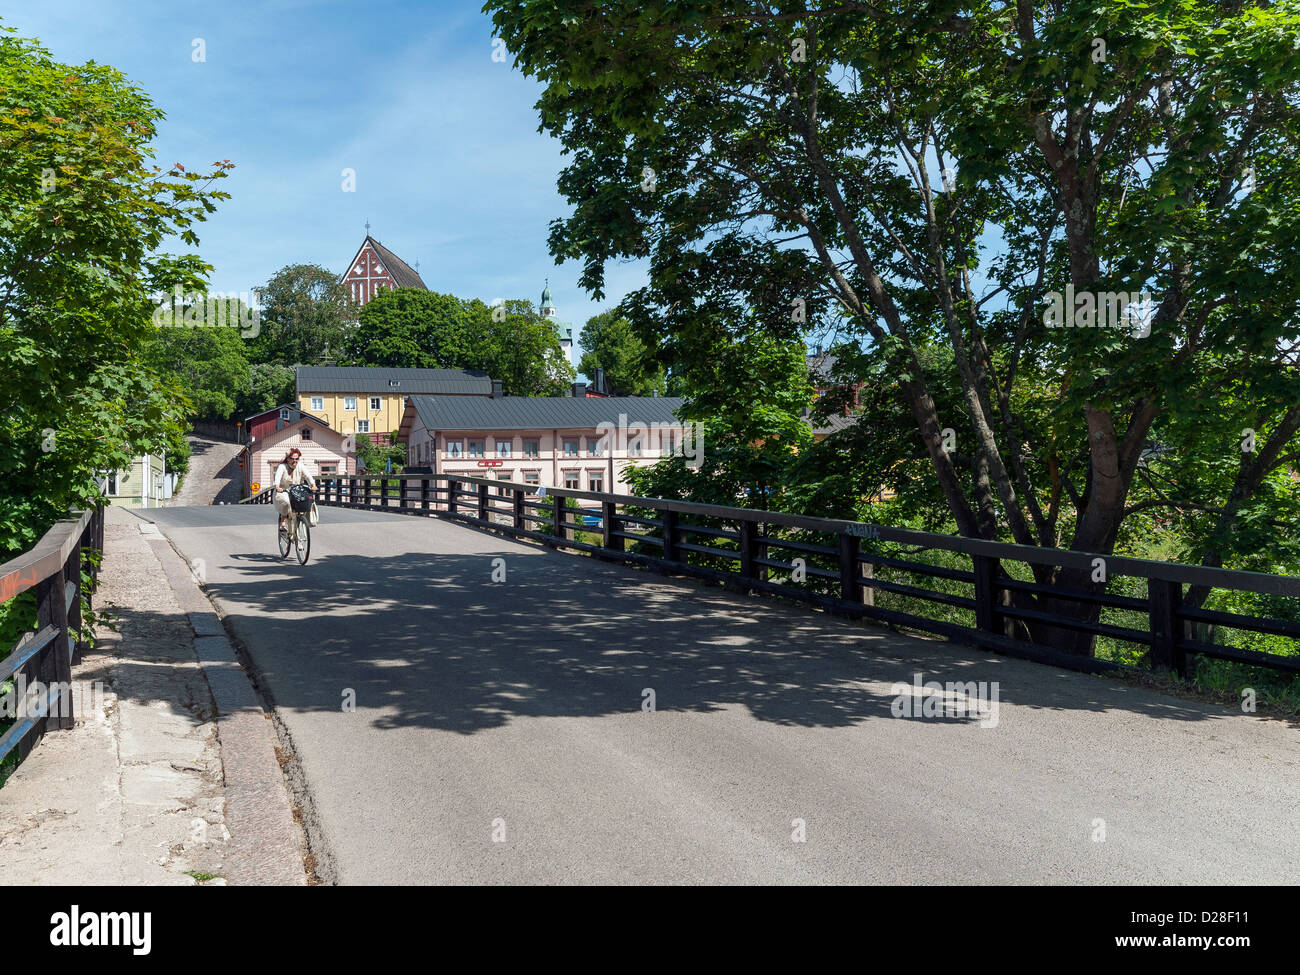 The Old Bridge leading into Old Town with Porvoo Cathedral sitting on the hill in Porvoo, Finland Stock Photo